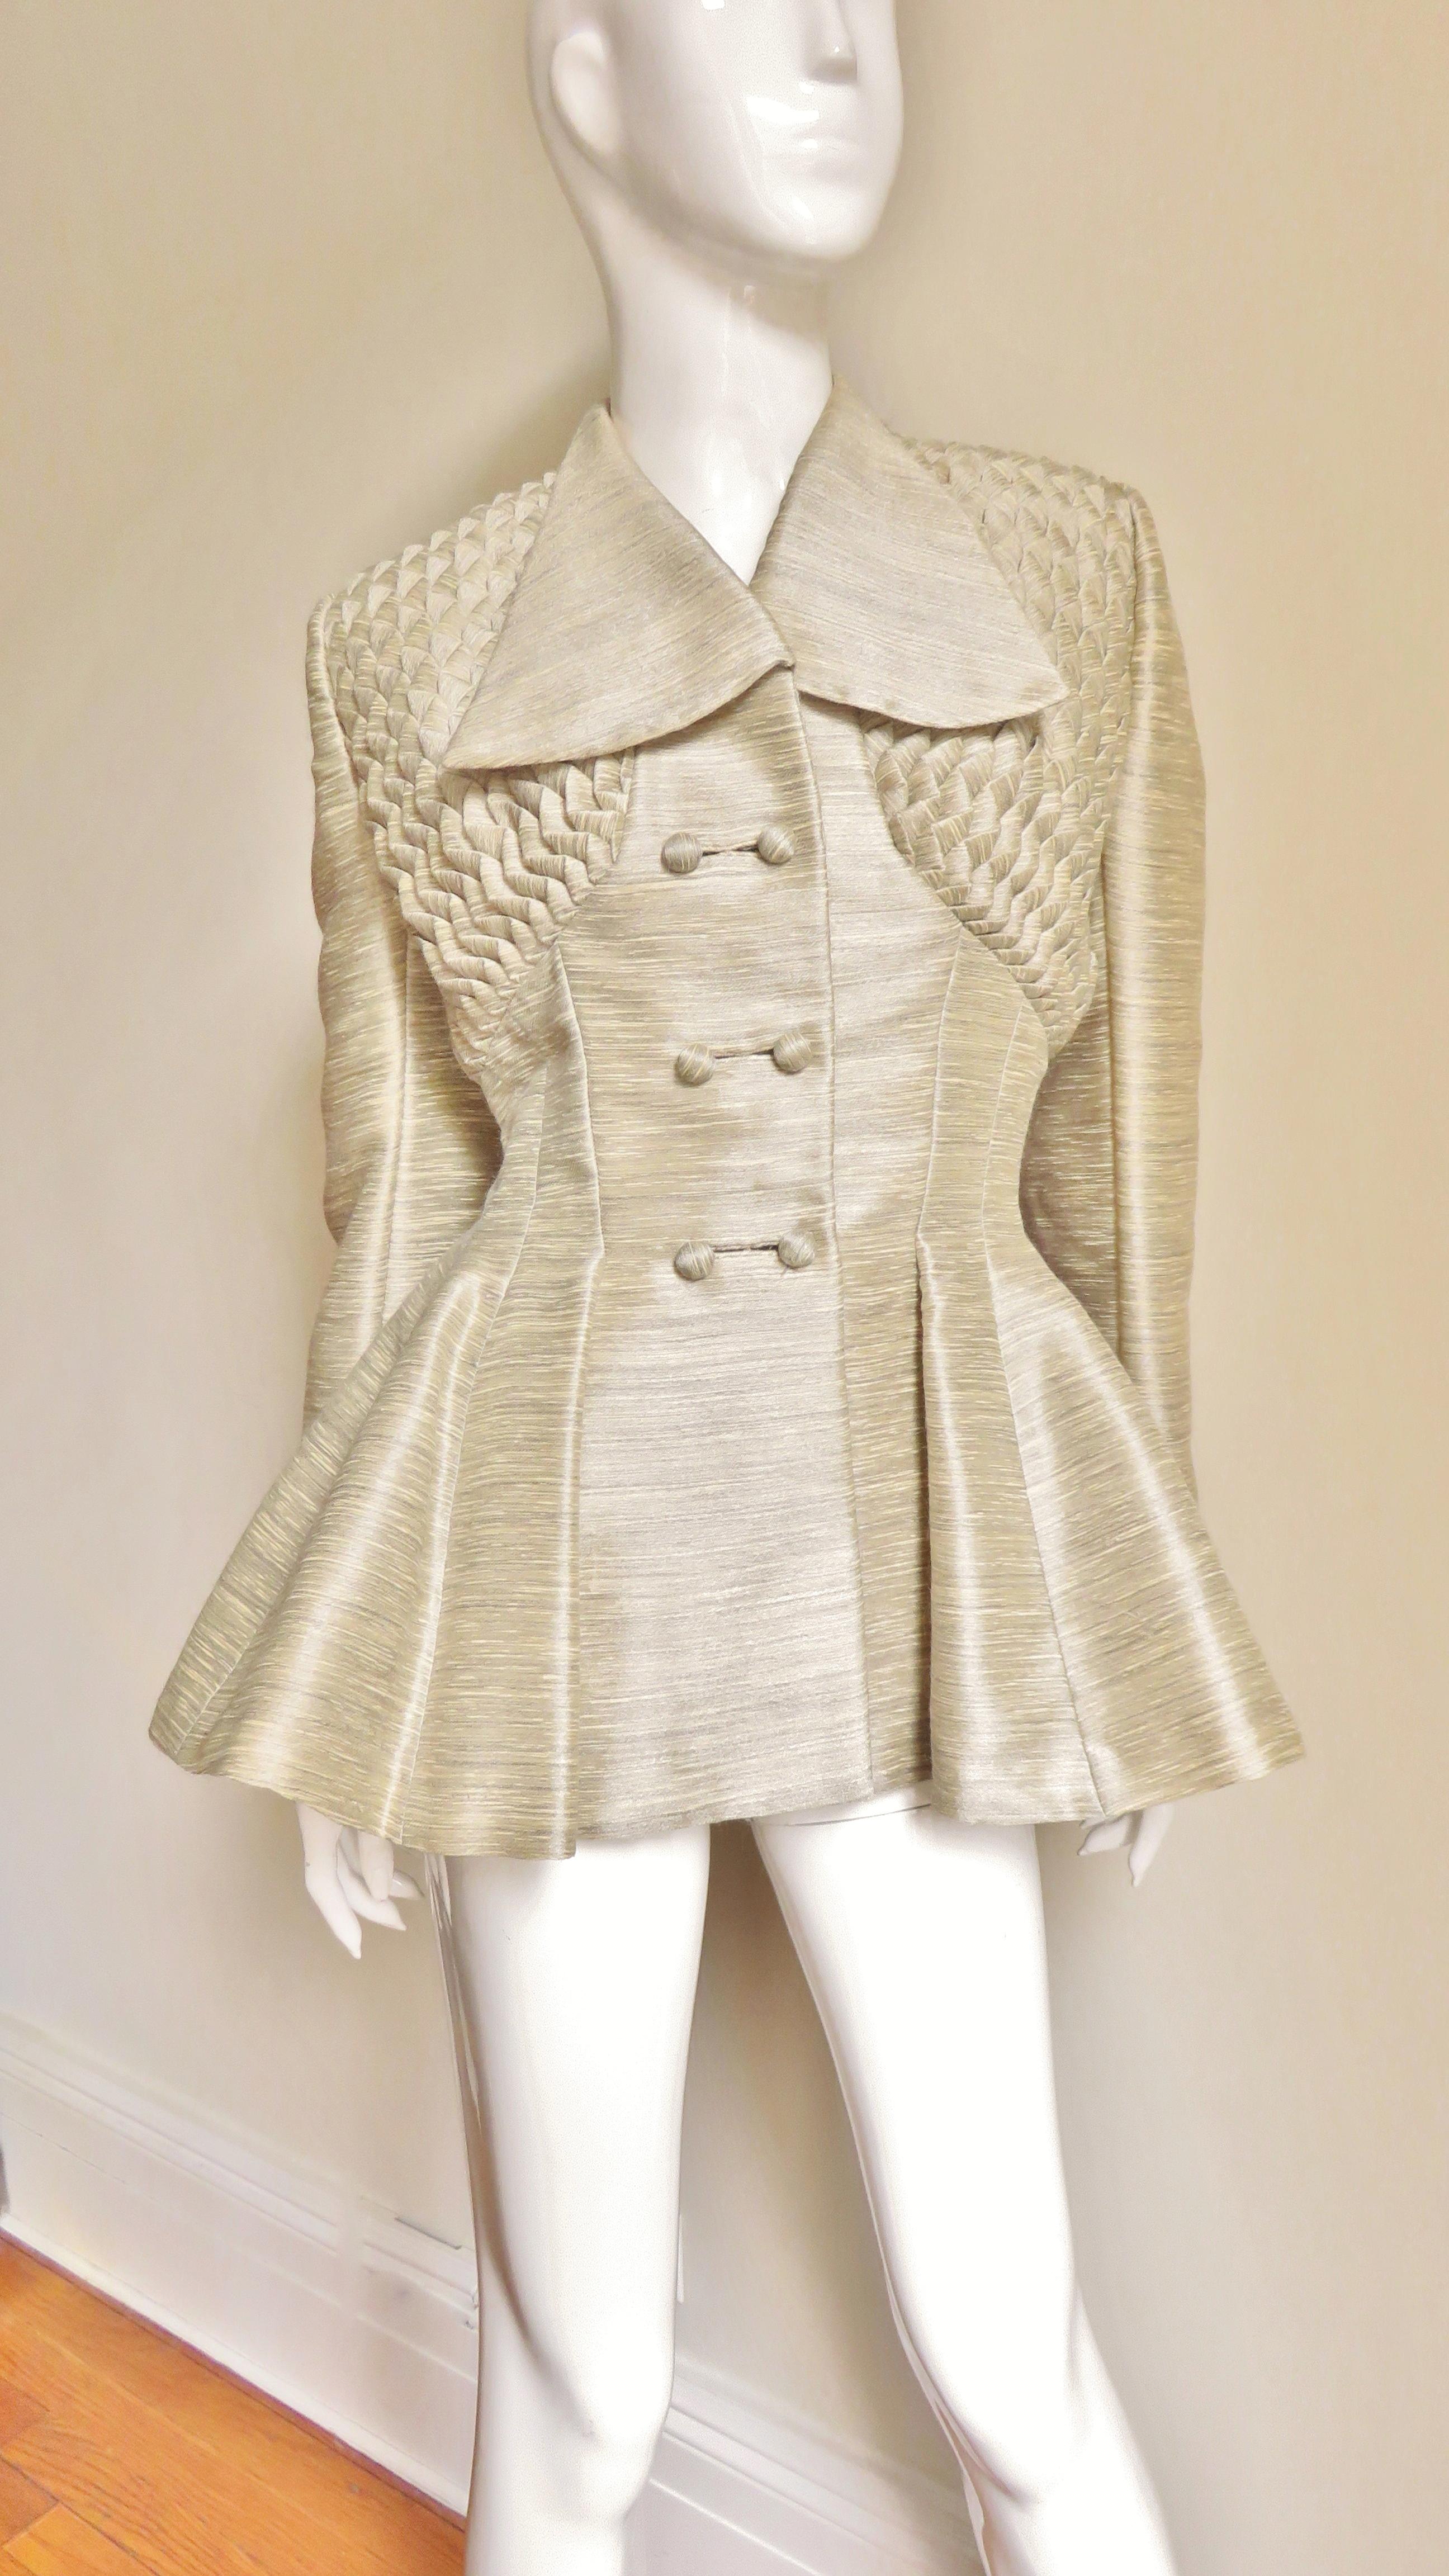 A fabulous beige and grey silk and wool fitted 1940's jacket from Lilli Ann.  The double breasted jacket has a winged front collar, long sleeves with fold back cuffs and front self covered ball buttons with bound buttonholes. There are intricately